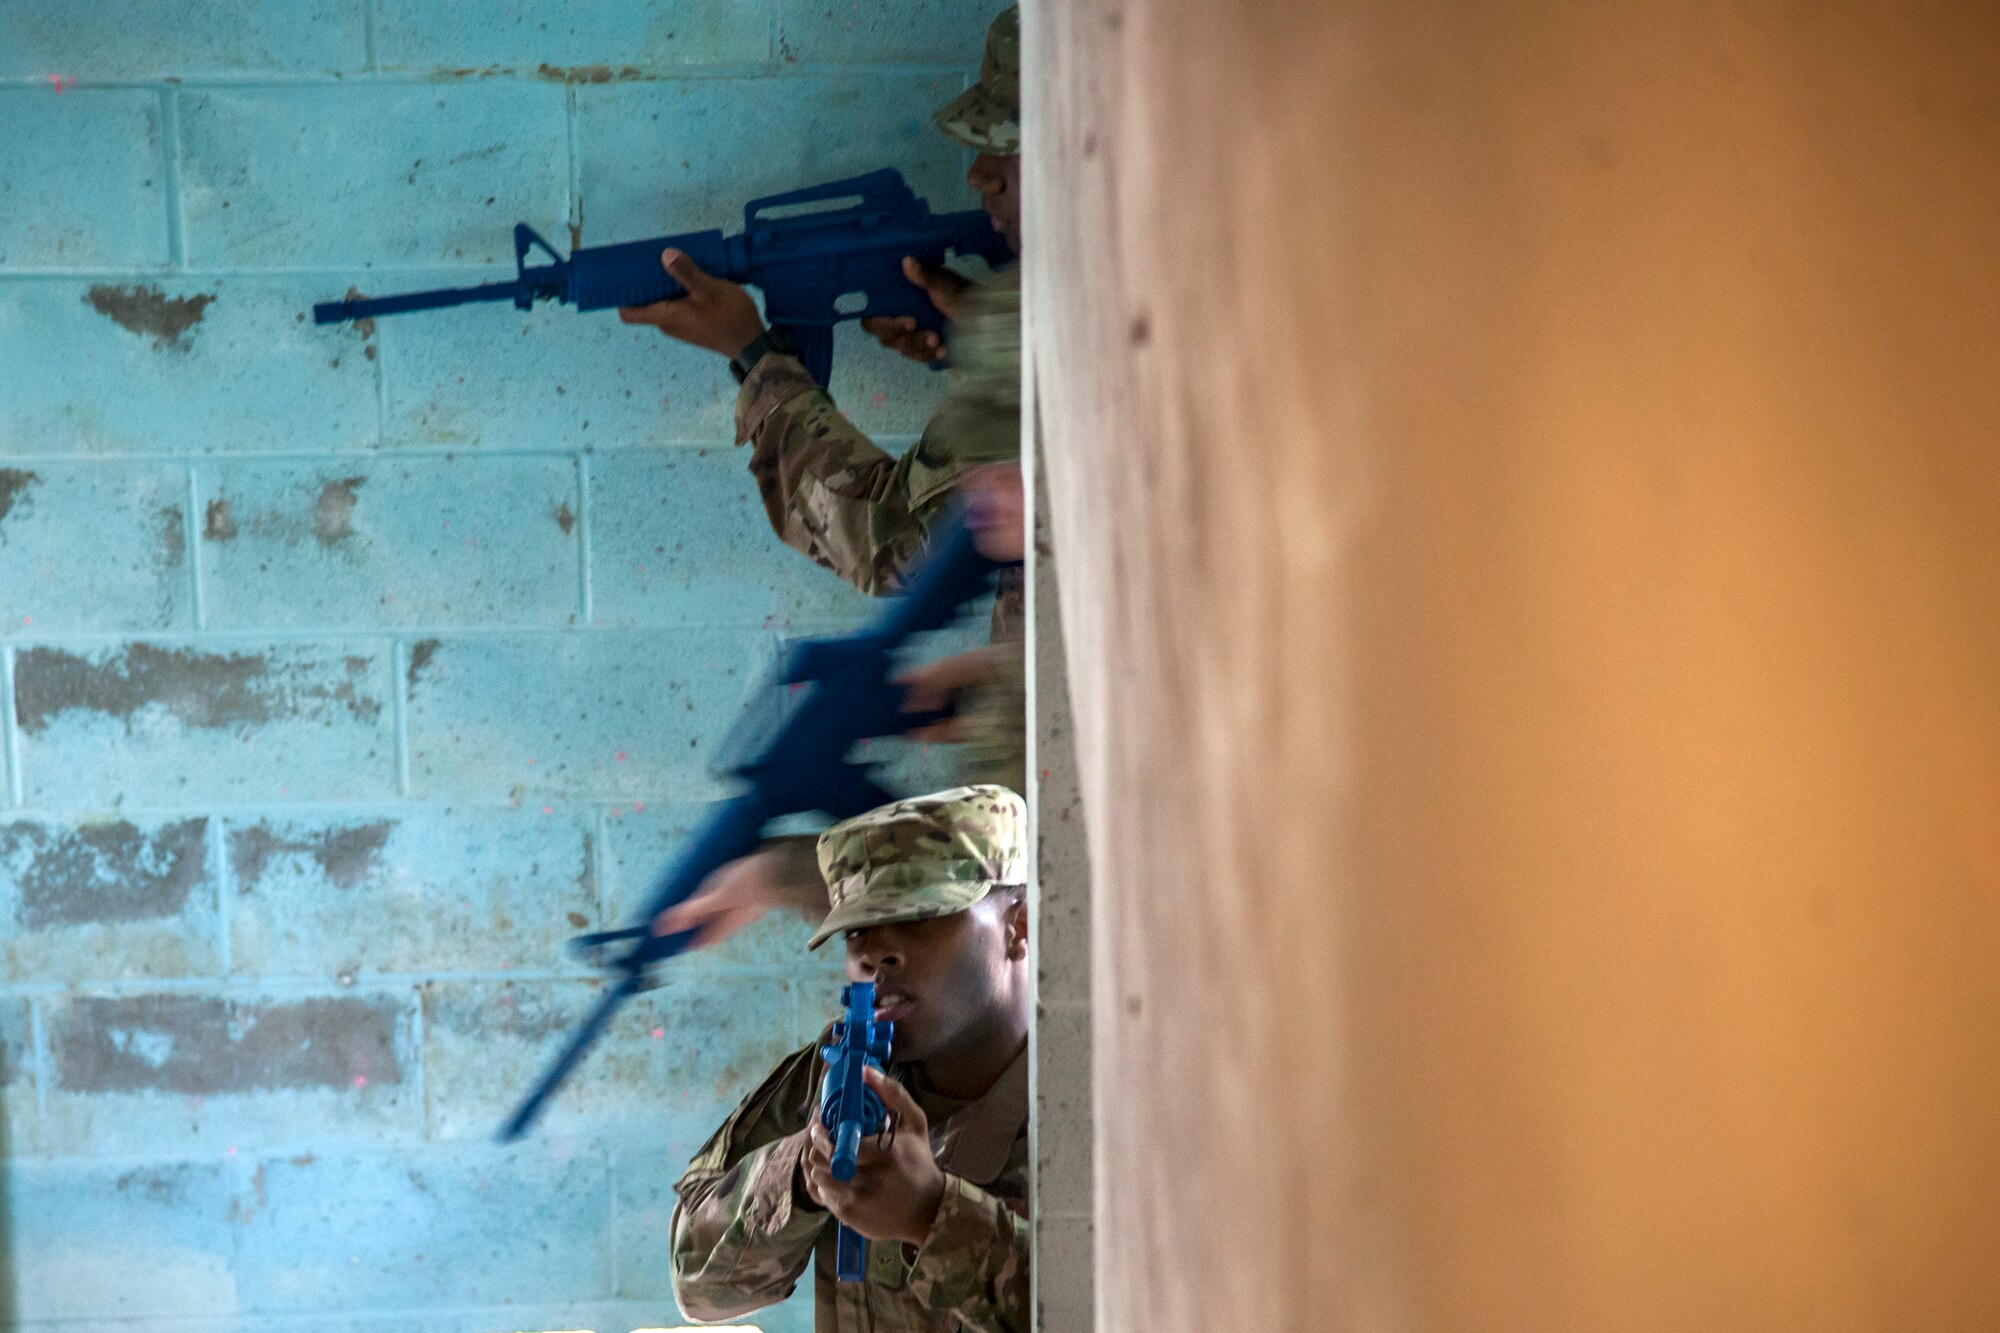 Airman Treyshaun Burnett, 824th Base Defense Squadron fireteam member, front, provides simulated cover fire for his fellow airmen while they enter a building during dismounted operations training, March 27, 2018, at Moody Air Force Base, Ga. The dismounted ops training is part of an Initial Qualification Training, which gives new Airmen coming into the 820th Base Defense Group an opportunity to learn a baseline of basic combat skills that will be needed to successfully operate within a cohesive unit while in a deployed environment. (U.S. Air Force photo by Airman Eugene Oliver)